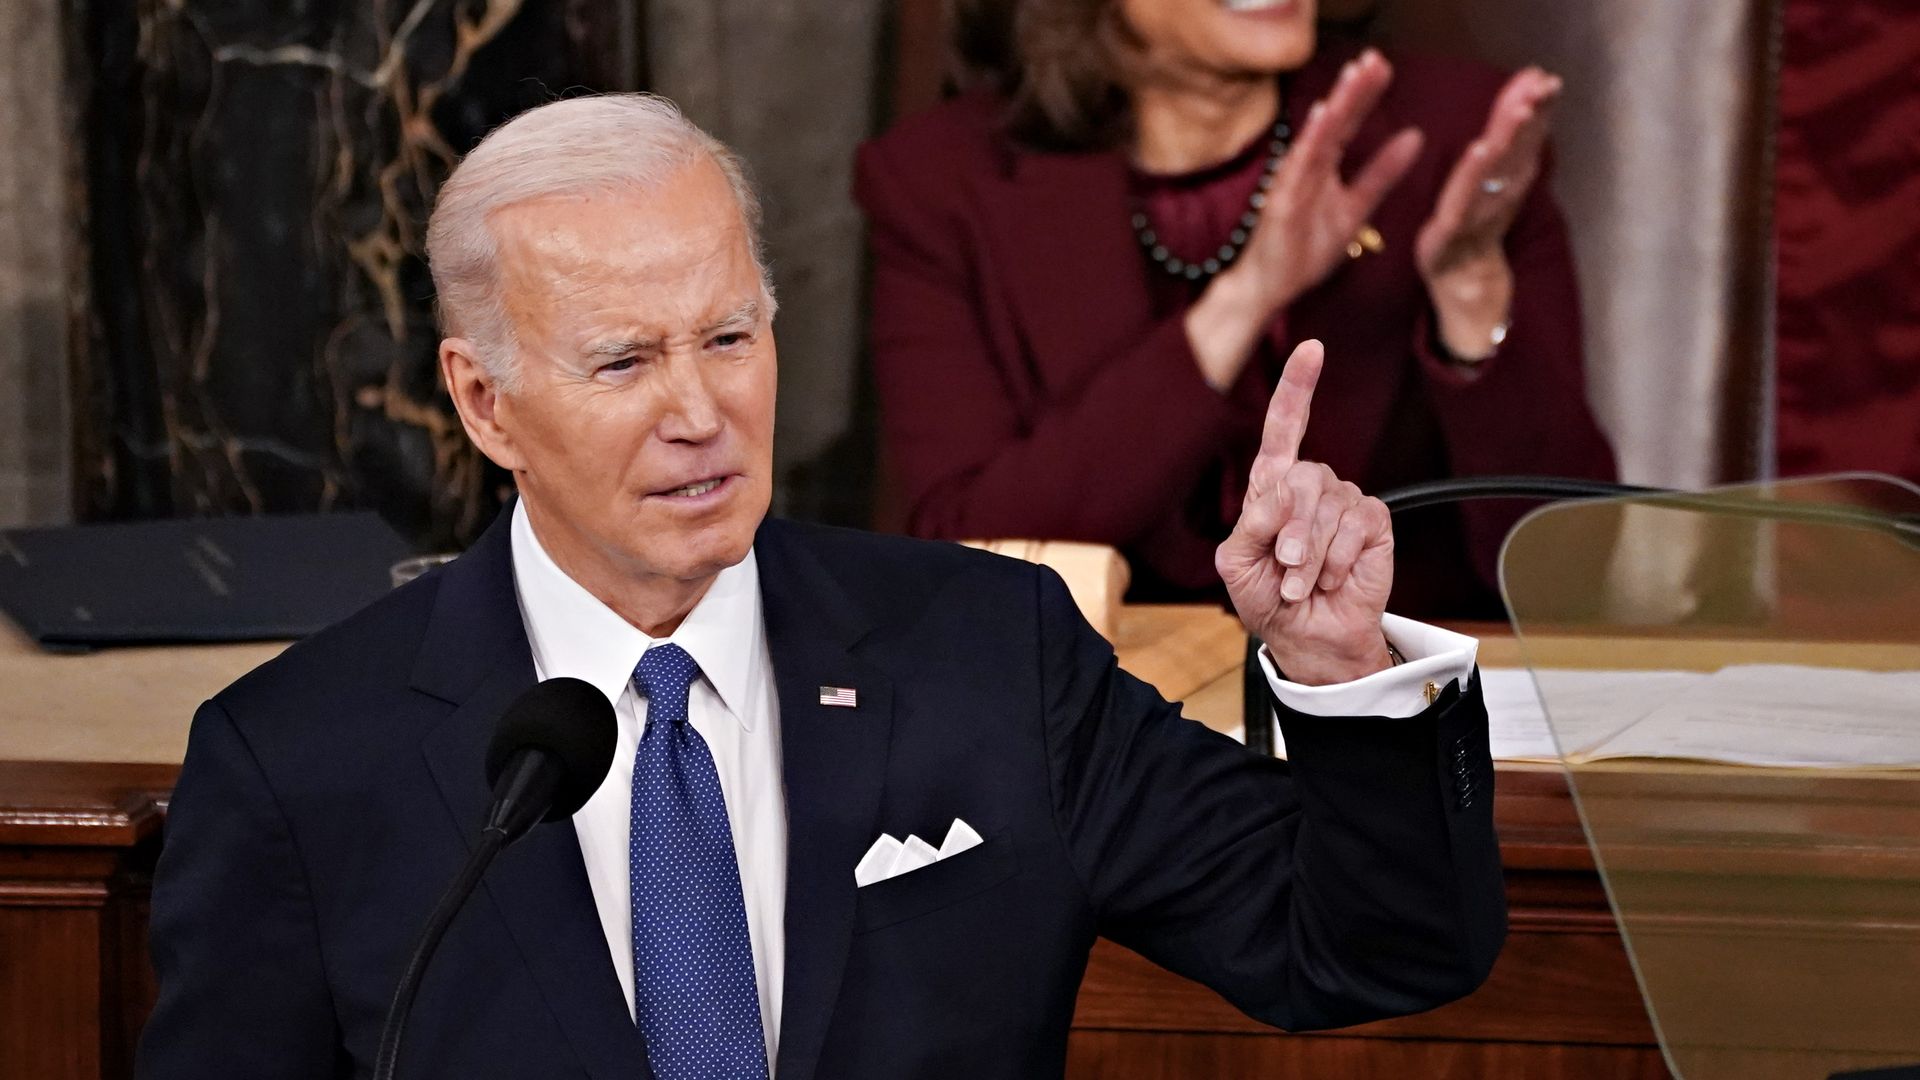 President Joe Biden addresses Congress during the 2023 State of the Union.